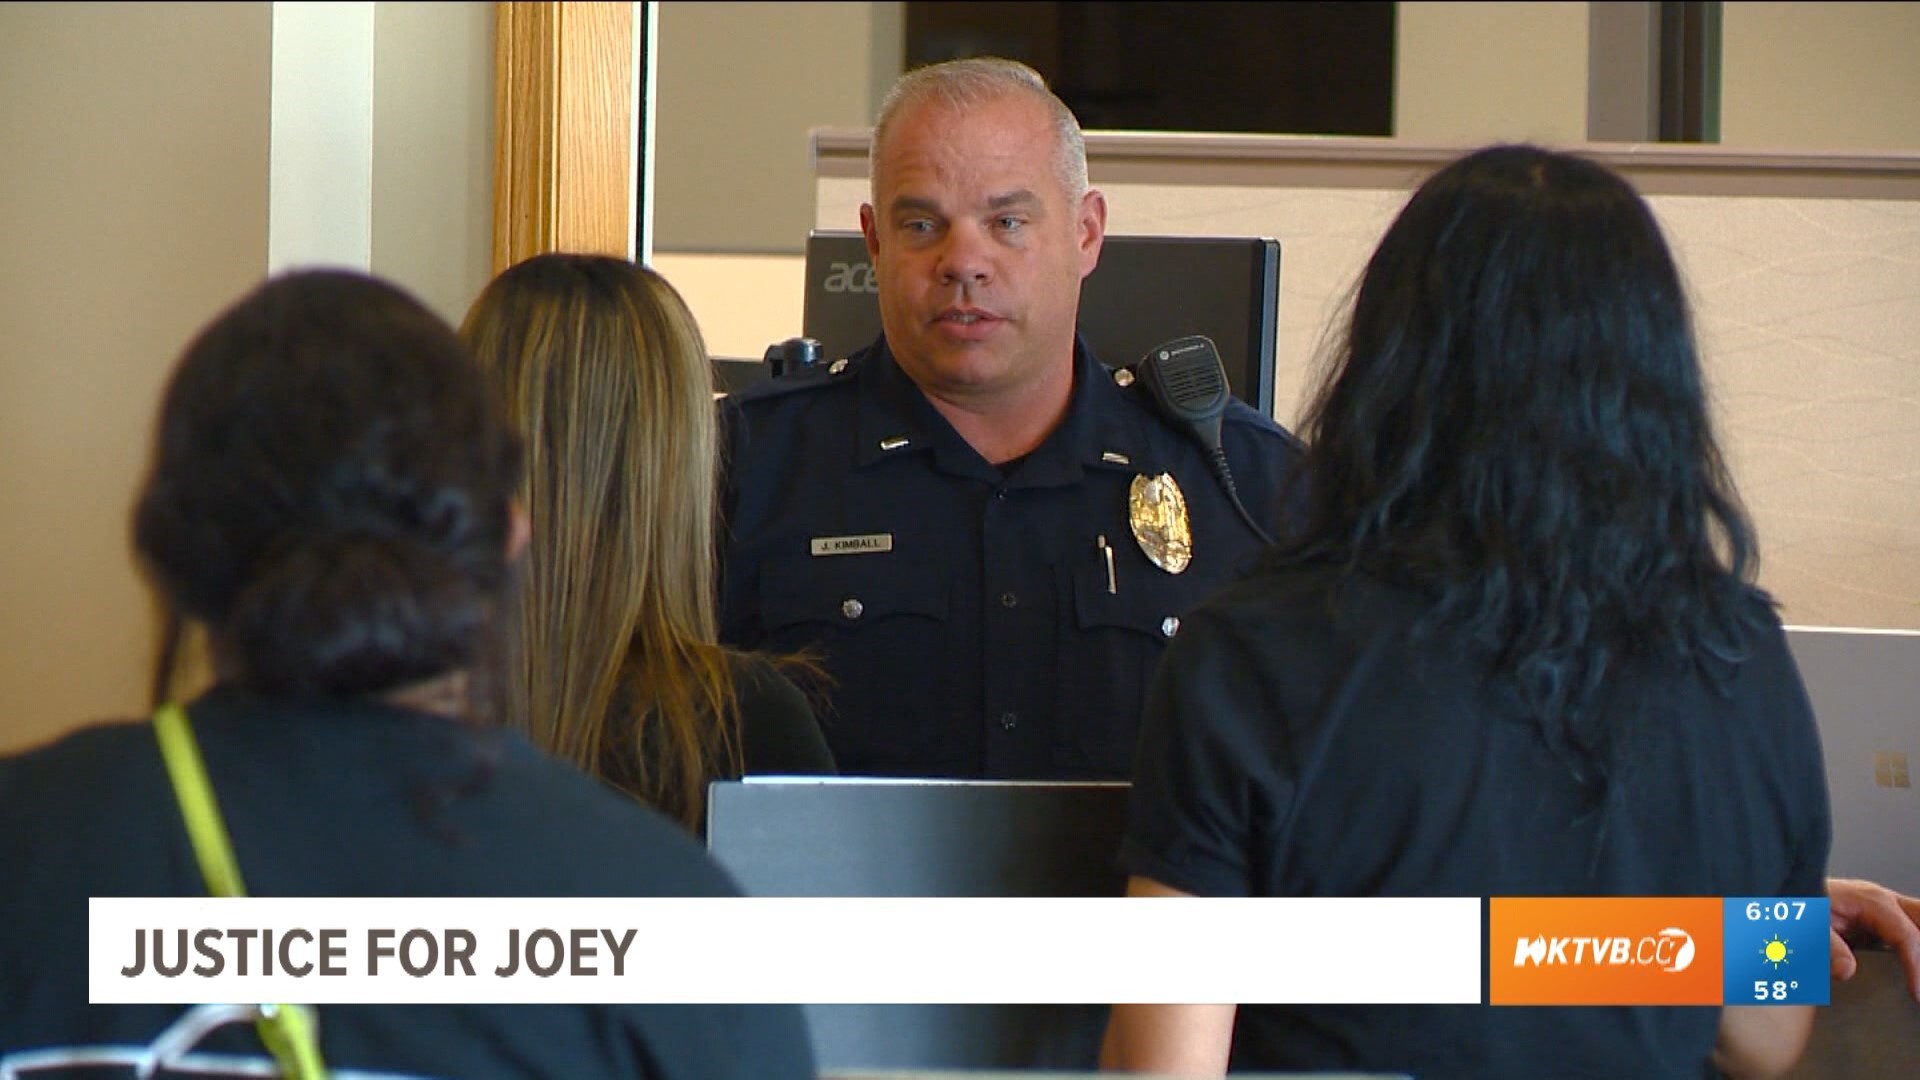 Friends of Joey Flores told the Nampa City Council, mayor and police that they're not happy with the police department's communication regarding the case.